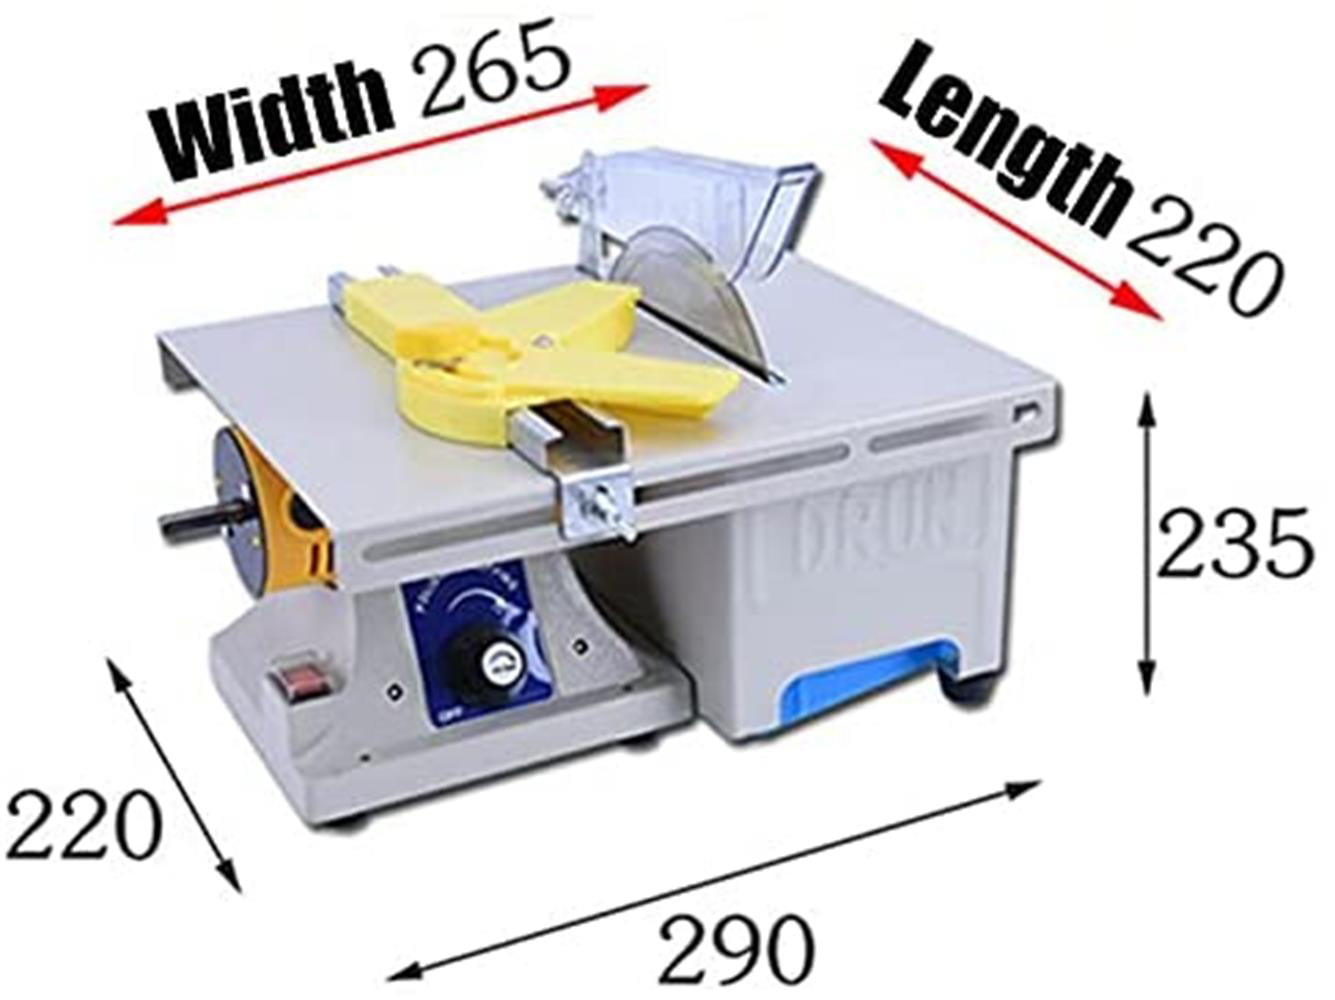 Mini Table Saw, Multifunctional Bench Lathe Jewelry Polishing Machine for DIY  Hobby Woodworking Jade Craft Making, Powerful 10000r/min, Seven-Level Sp 